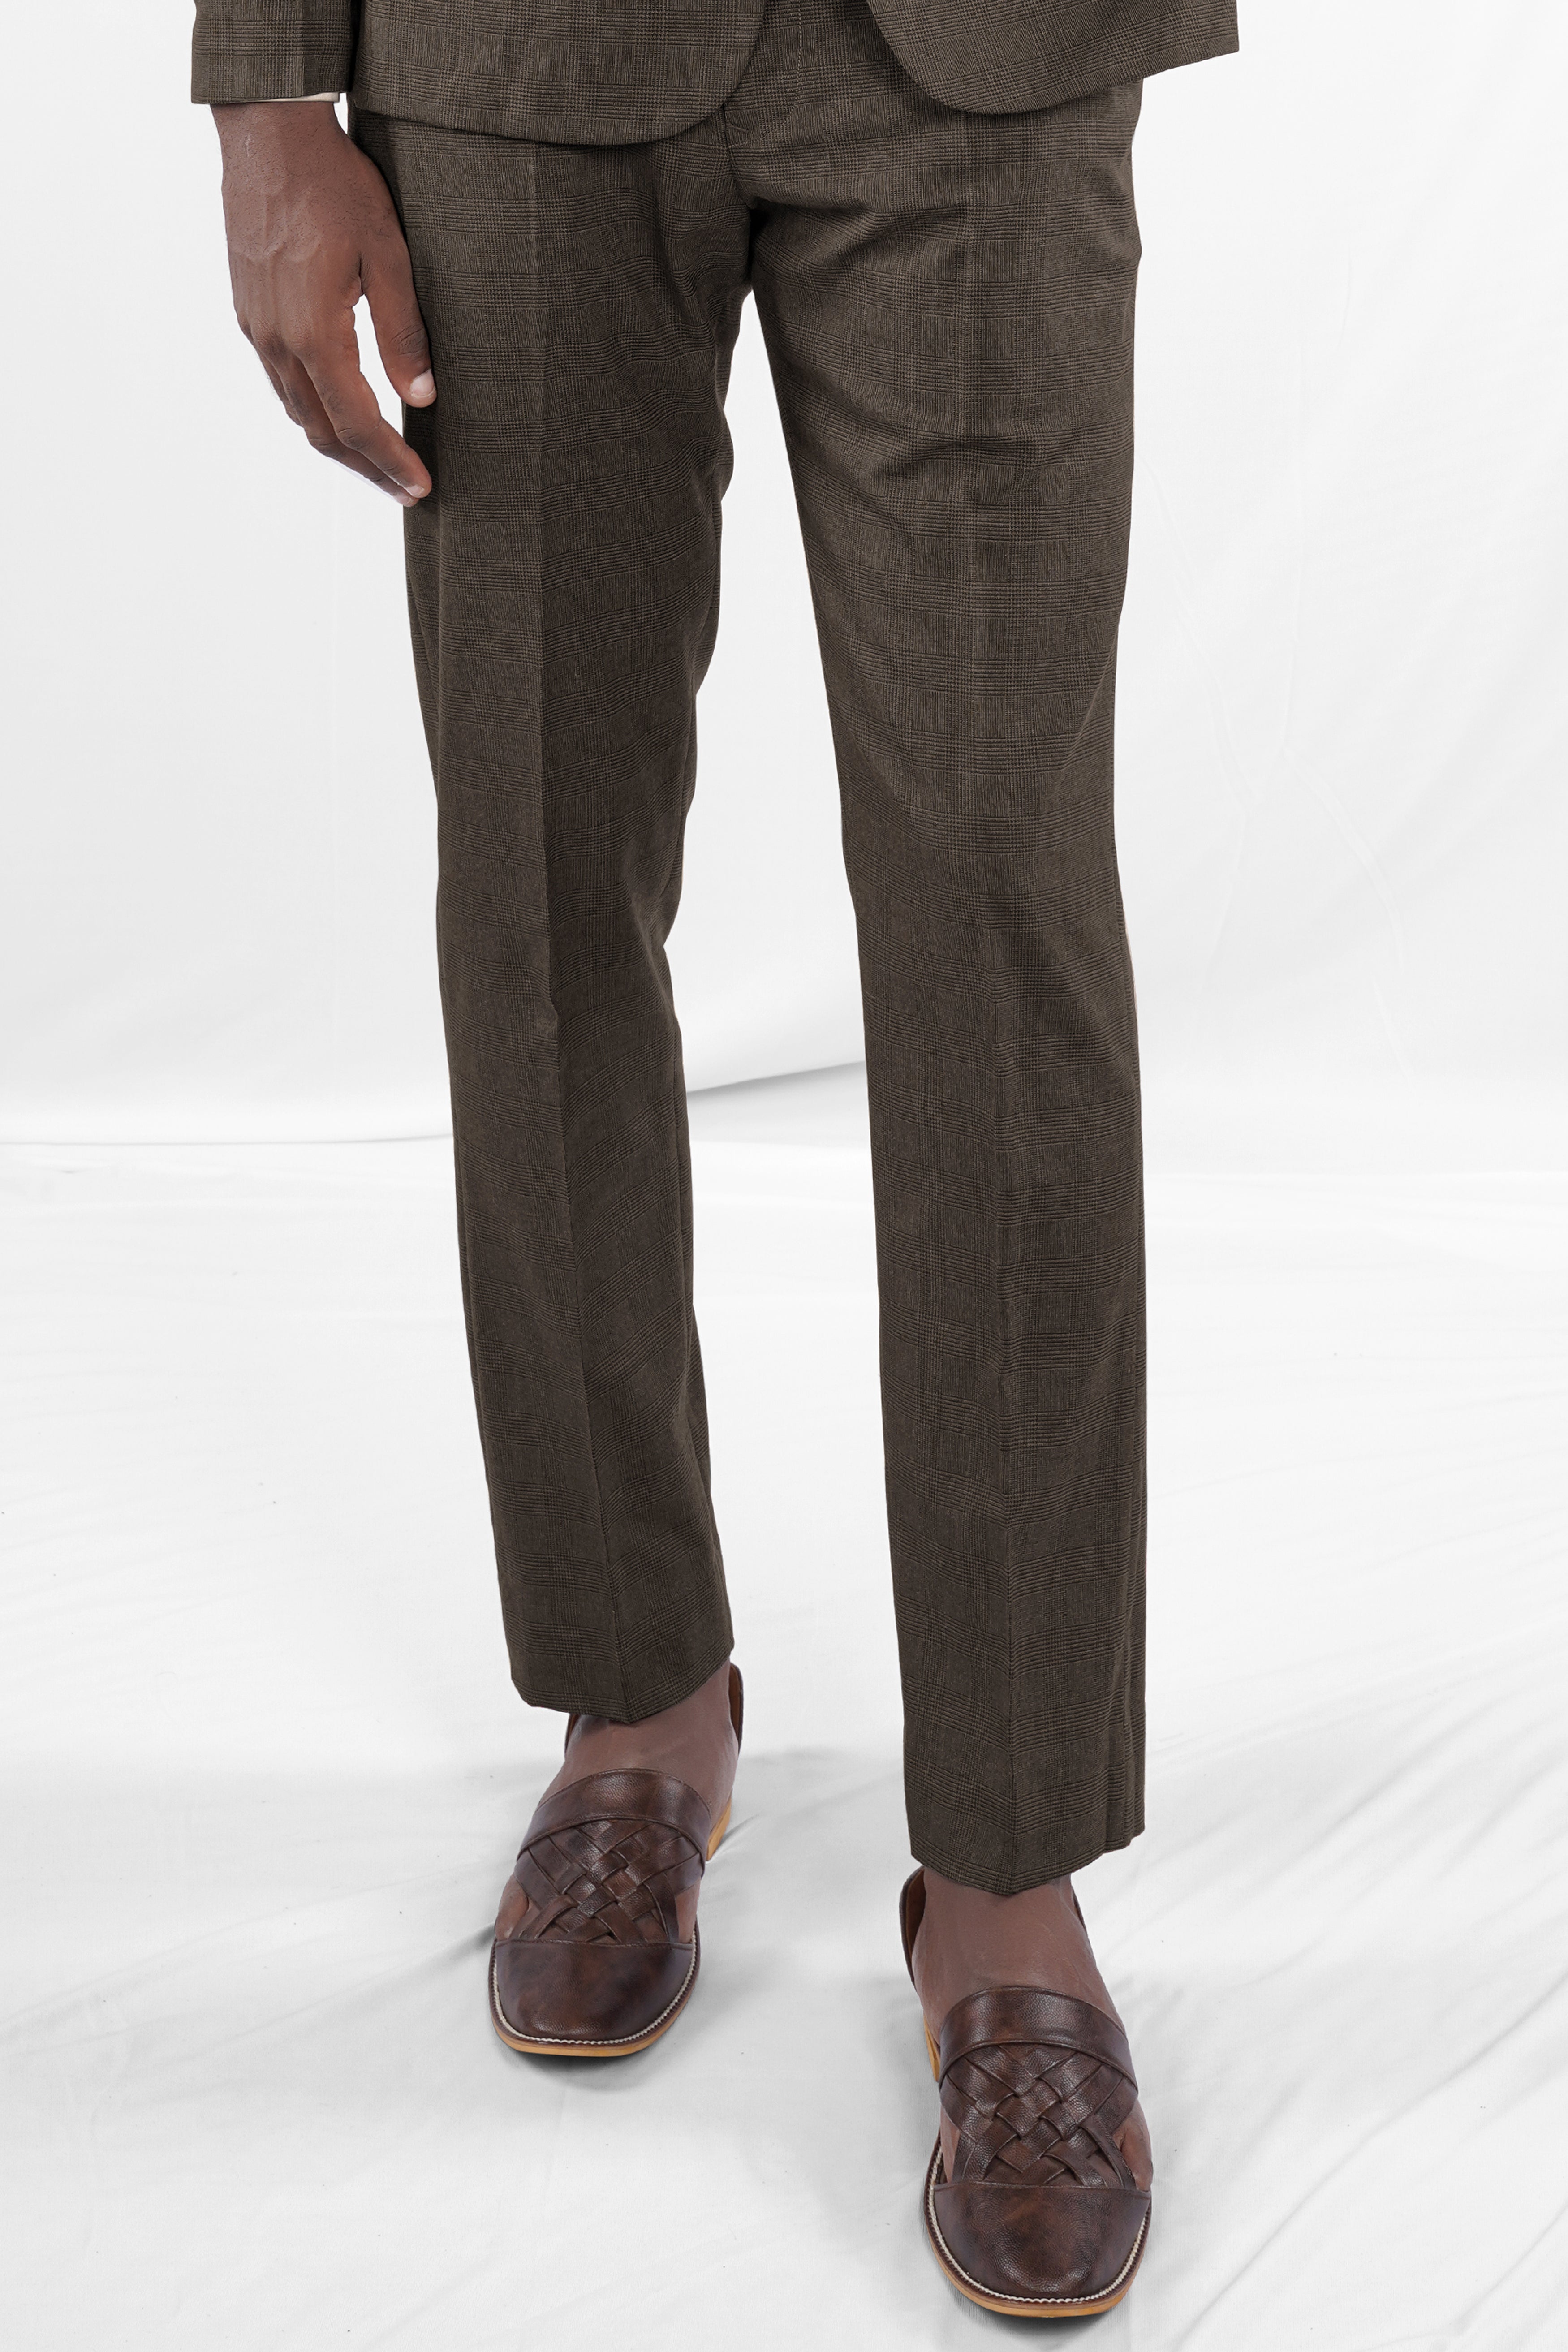 Taupe Coffee Brown Pant T2703-28, T2703-30, T2703-32, T2703-34, T2703-36, T2703-38, T2703-40, T2703-42, T2703-44